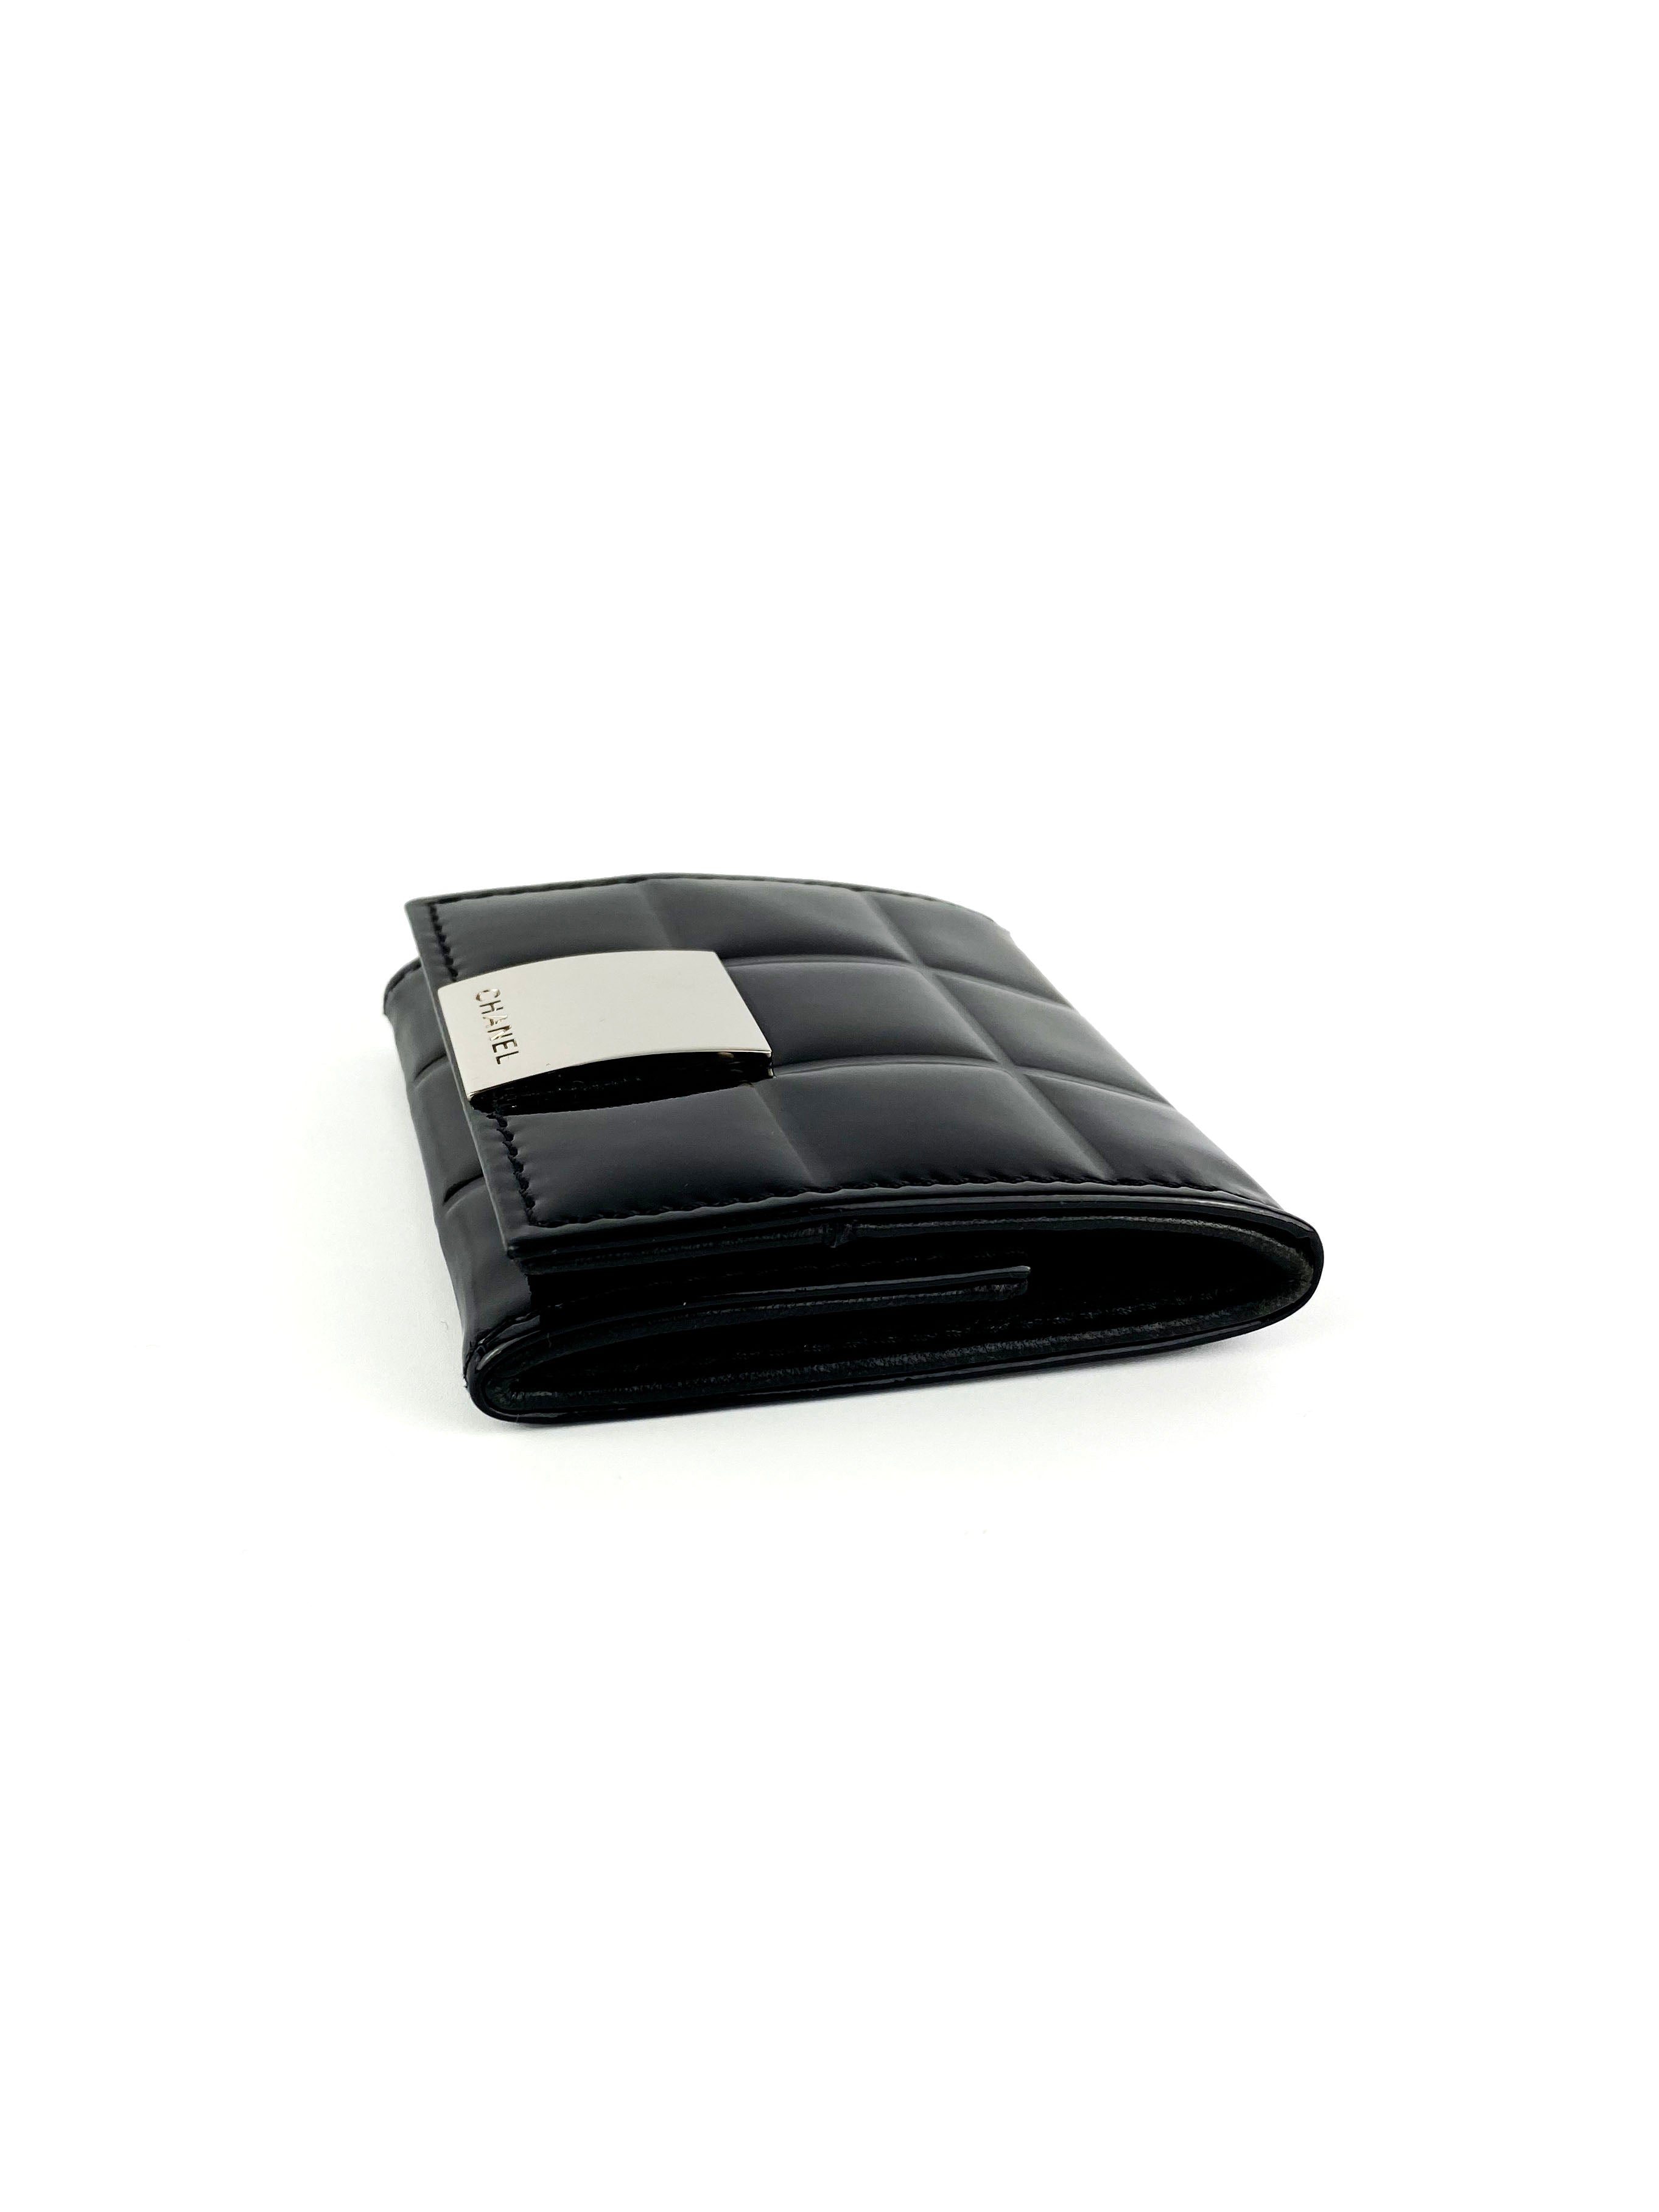 Chanel Black Patent Leather Coin Purse/Cardholder